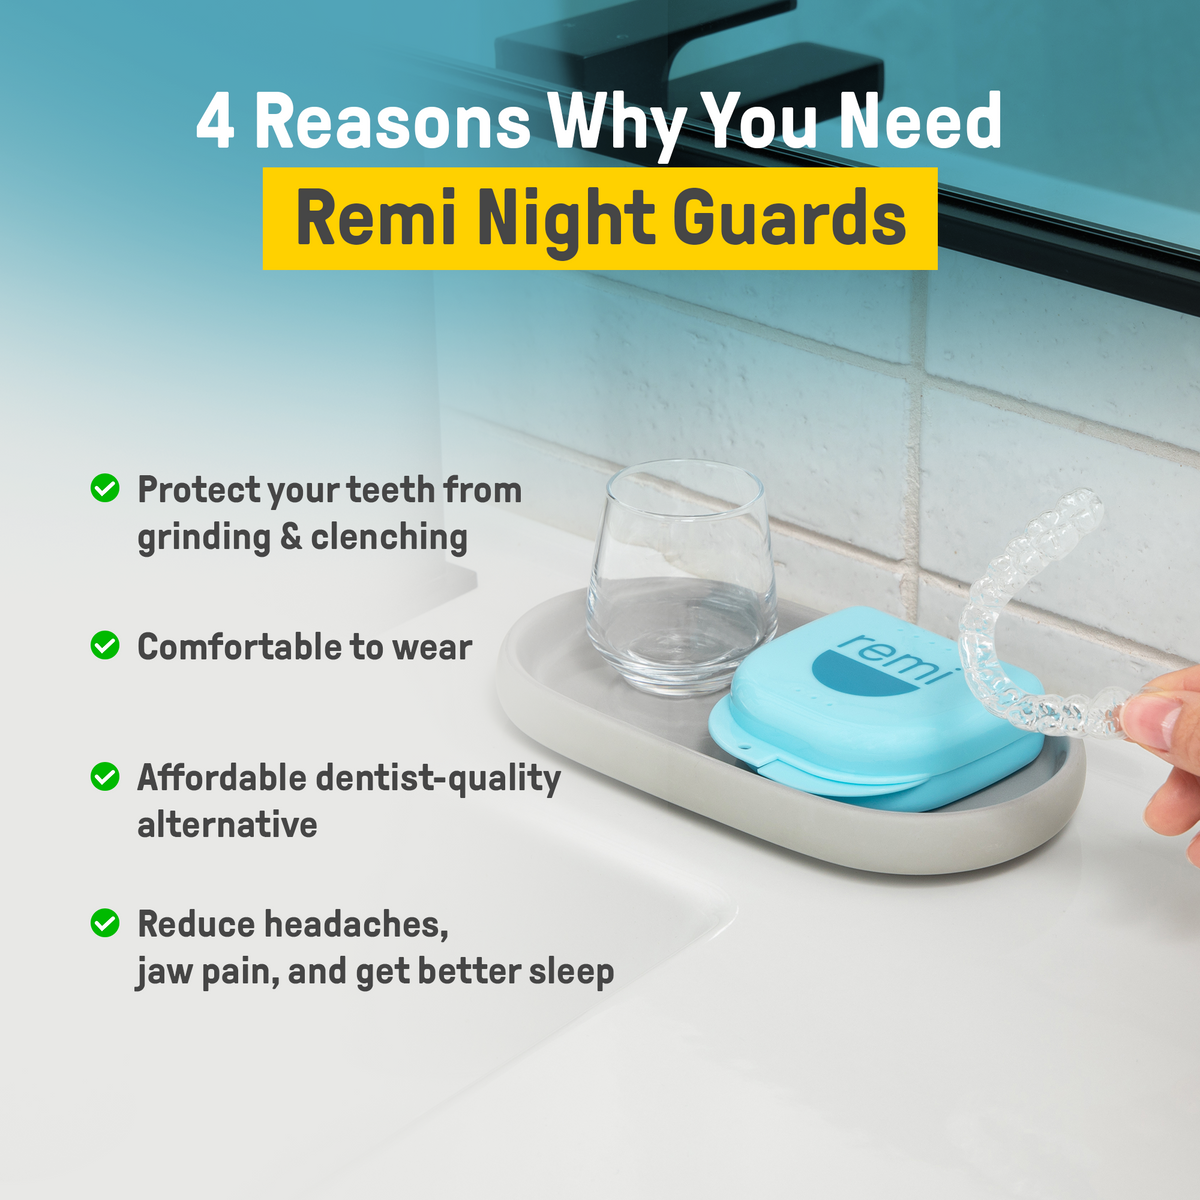 Image of a bathroom countertop with a Custom Night Guards case, a glass, and a hand holding a dental-grade night guard. Text on the image outlines four benefits of Custom Night Guards: protection, comfort, affordability, and pain reduction for jaw pain.